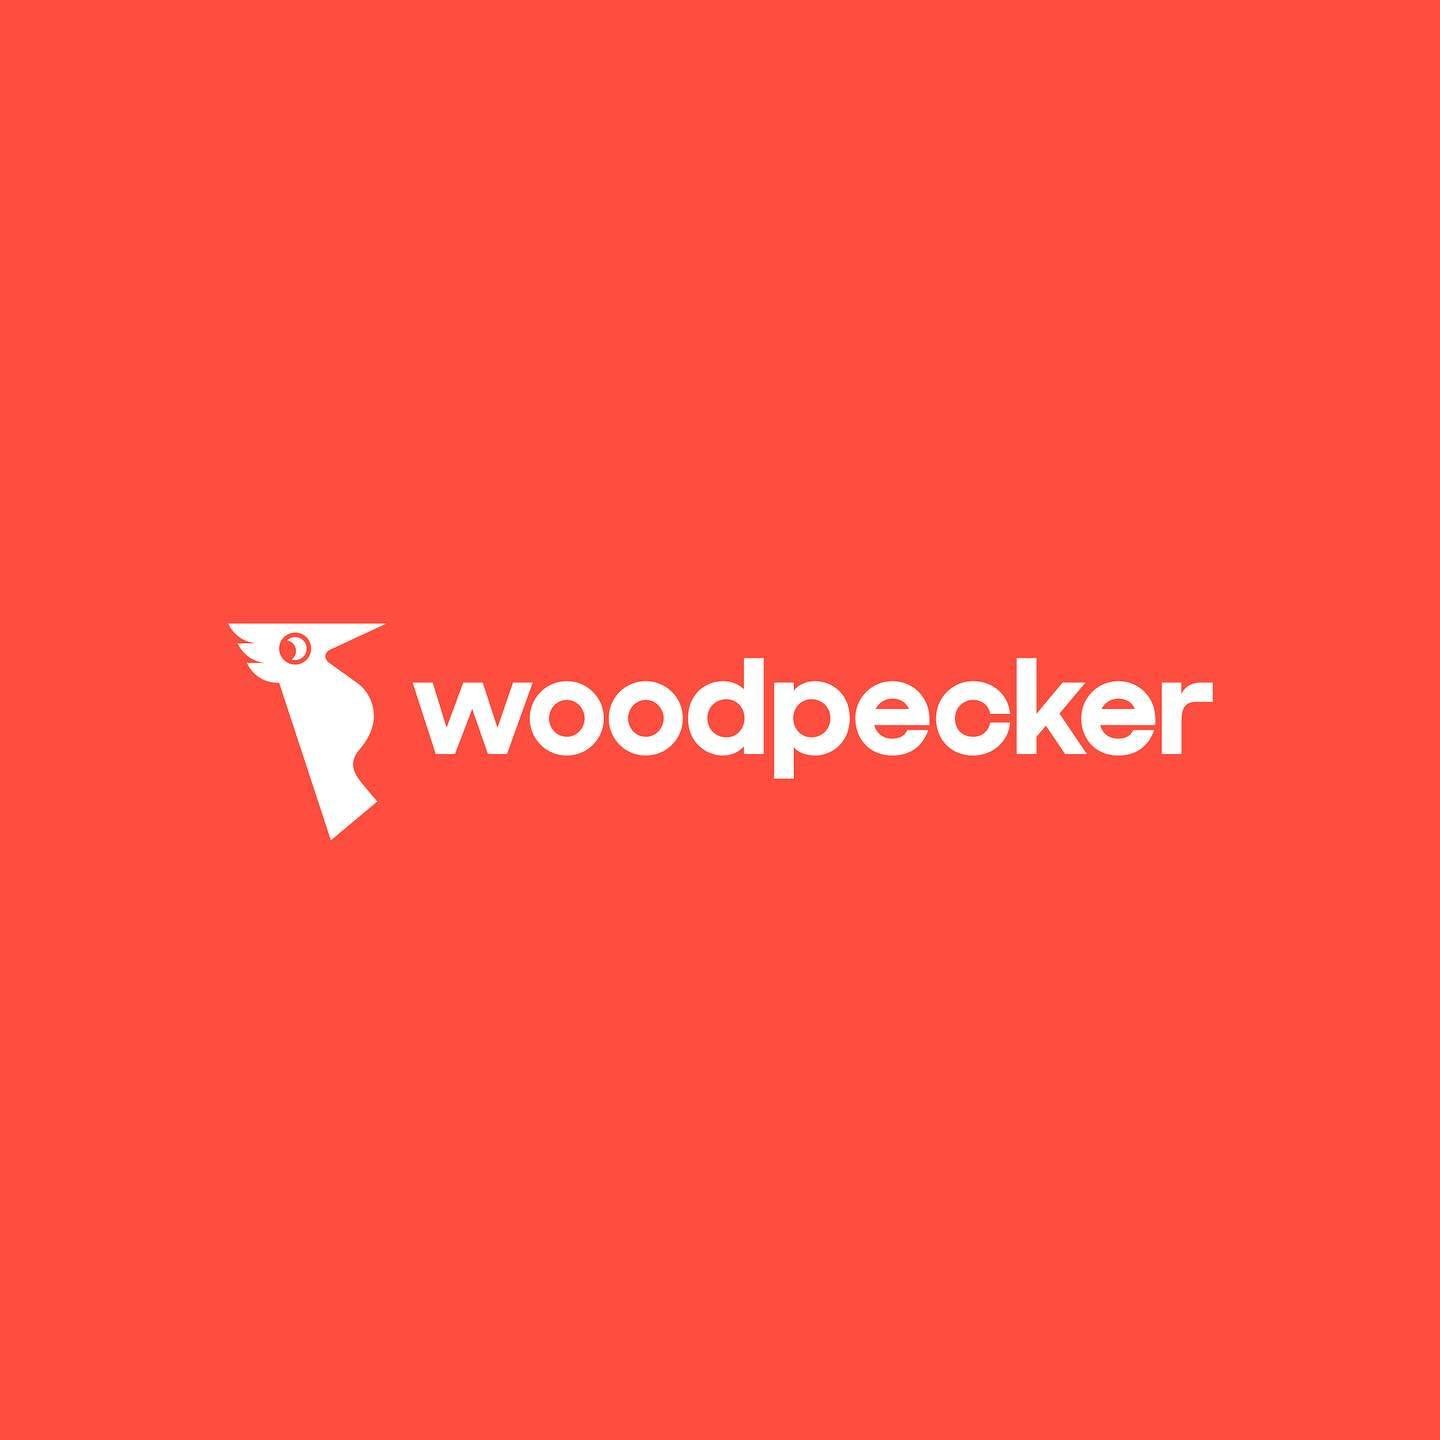 Since 1976, @woodpeckerfilm has been a cornerstone in Finlands film and advertising production. Through industry evolving, technologies advancing, and trends shifting &mdash; their dedication to production has remained unwavering. The project involve